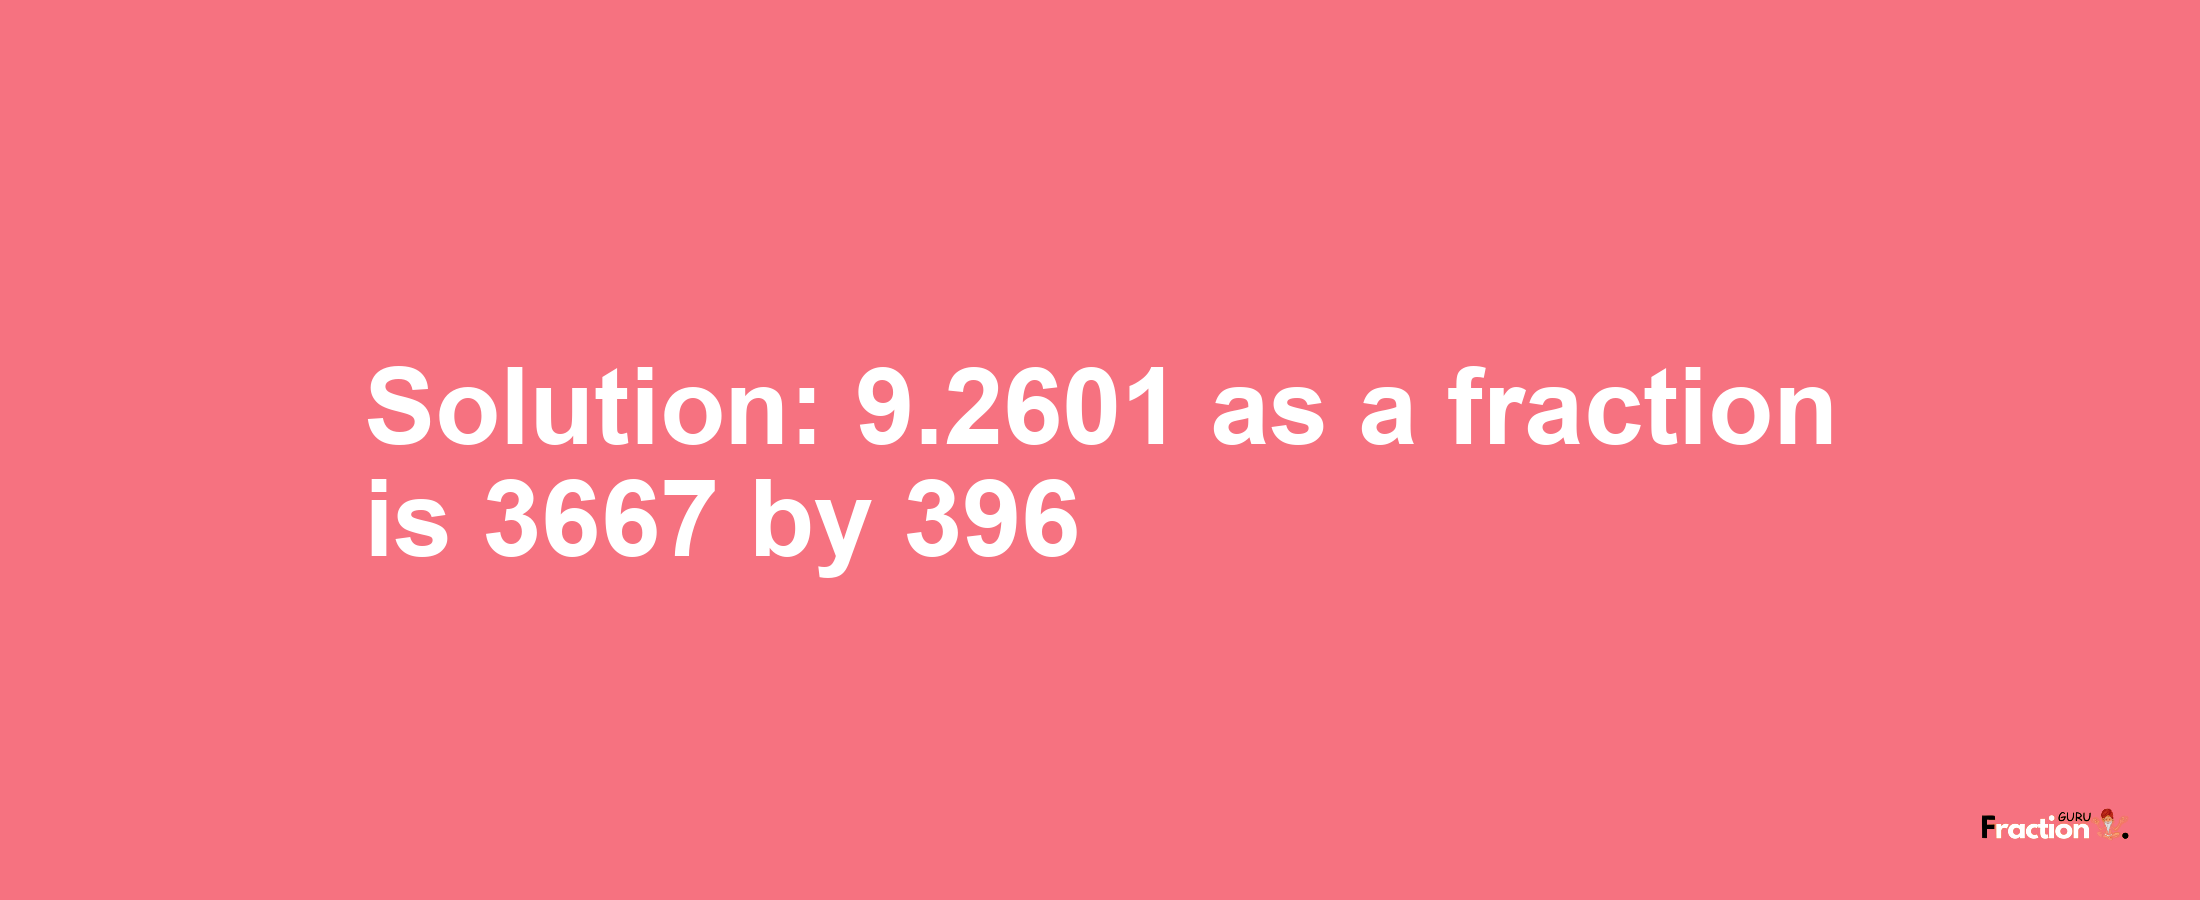 Solution:9.2601 as a fraction is 3667/396